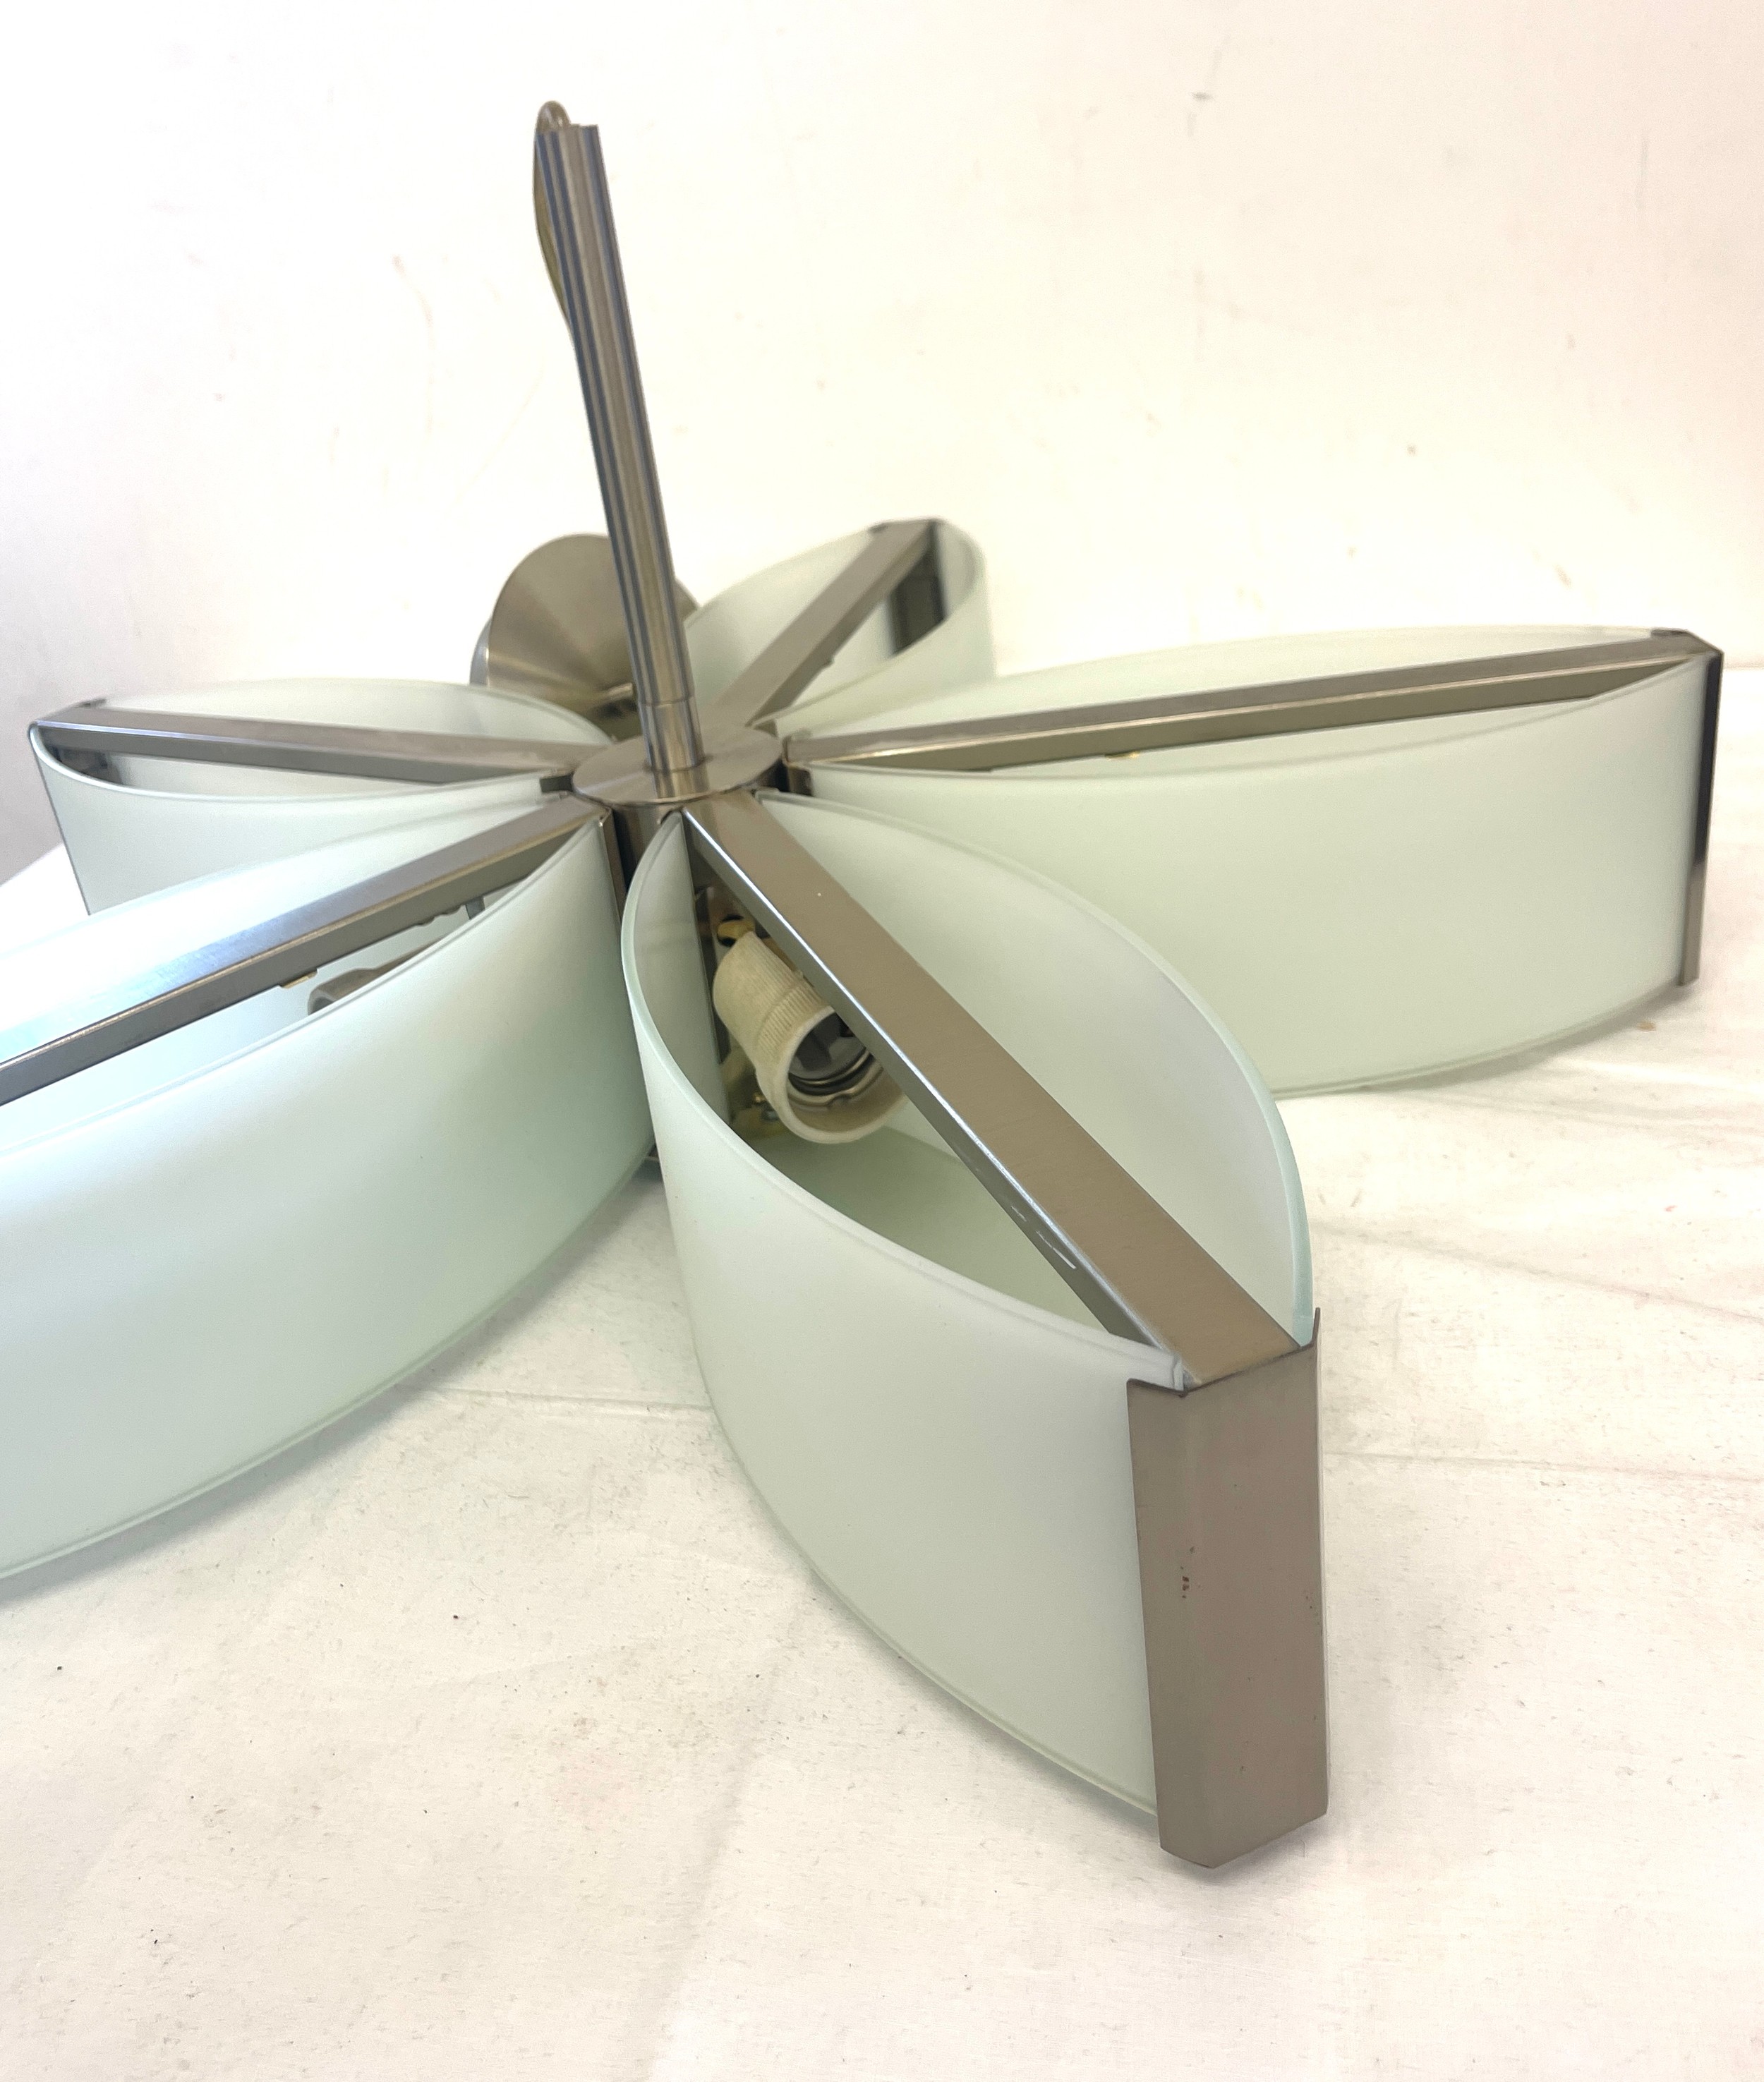 Retro ceiling light fitting, approximate measurement: diameter 22 inches, Height 12 inches - Image 4 of 4